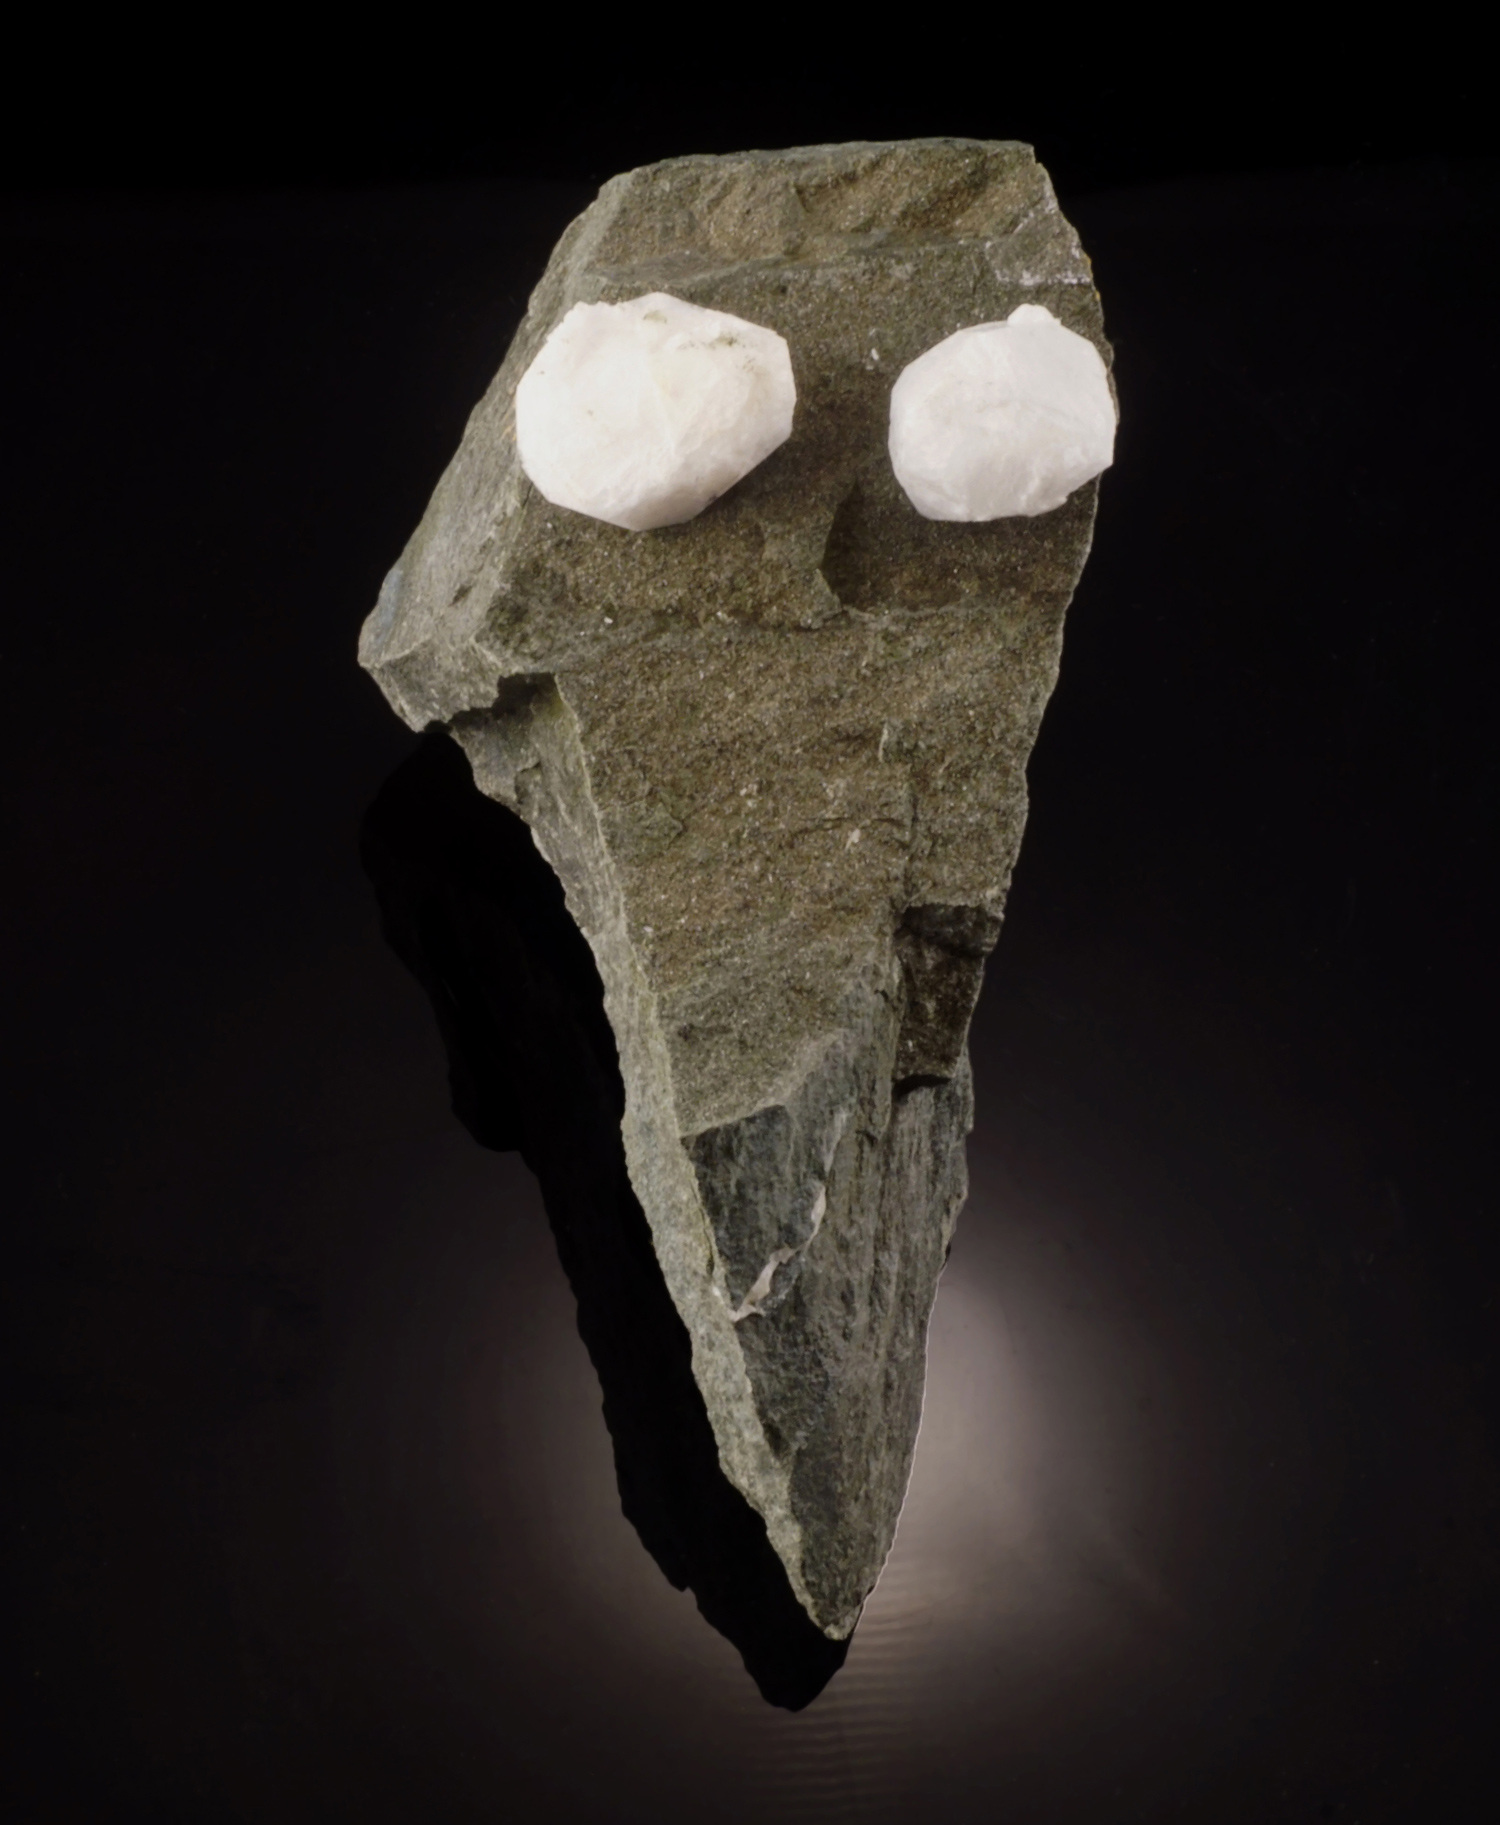 Analcime Alien Eyes from Chimney Rock Quarry, Bound Brook, Somerset Co., New Jersey